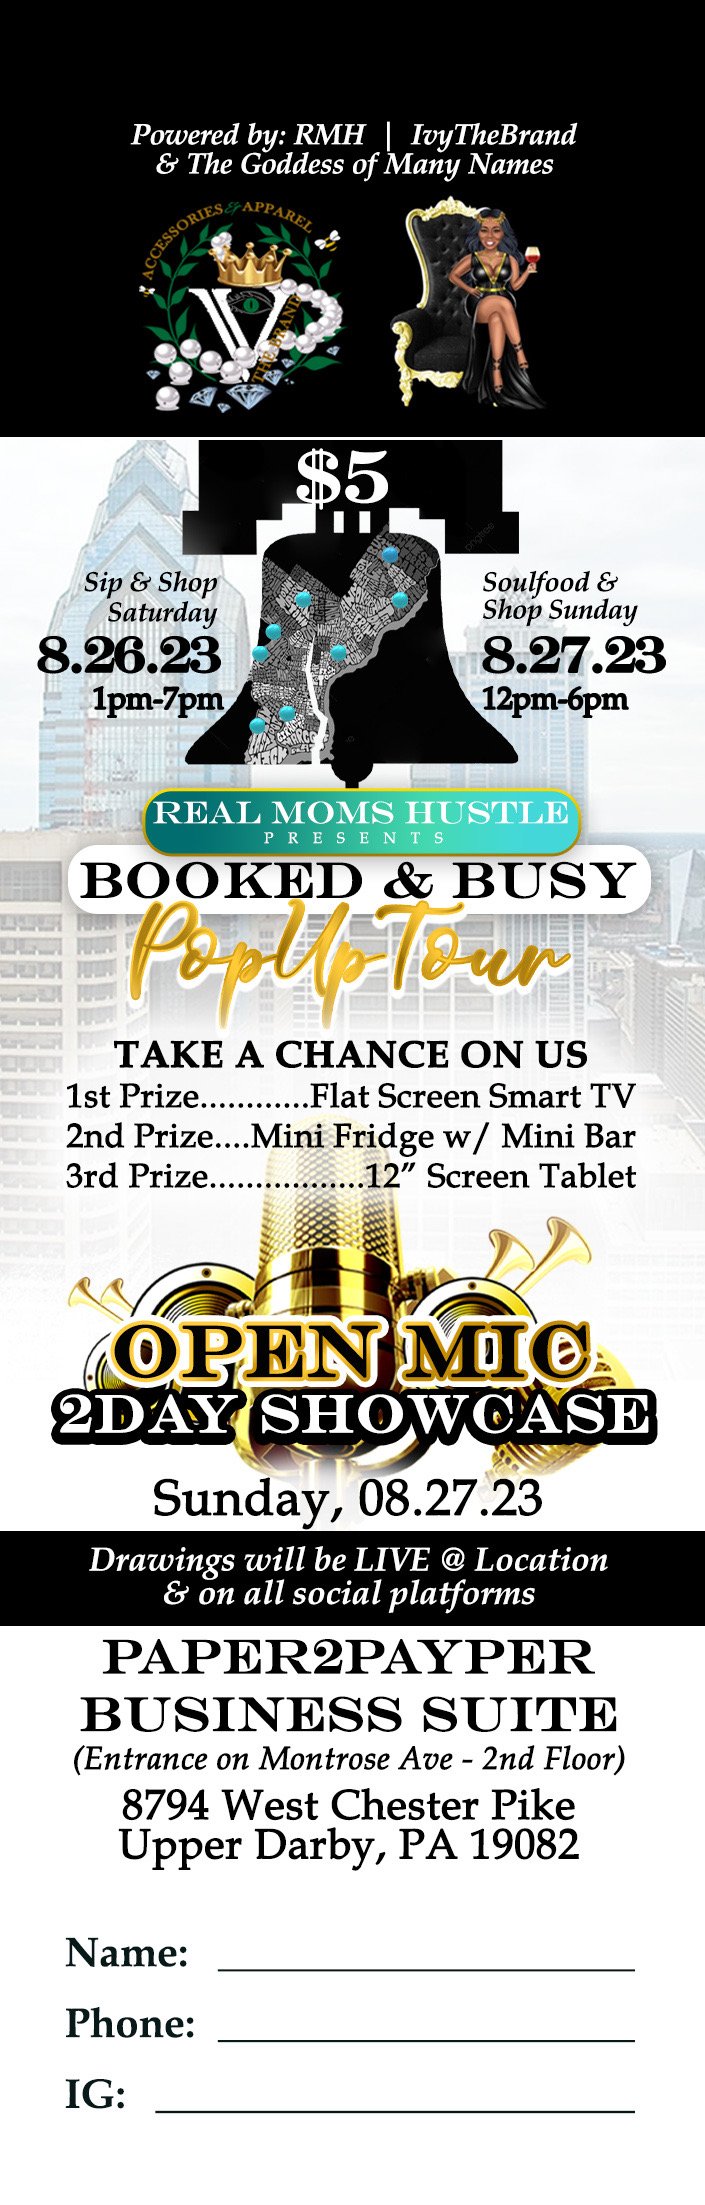 Real Moms Hustle Booked & Busy PopUp Tour Vendors 